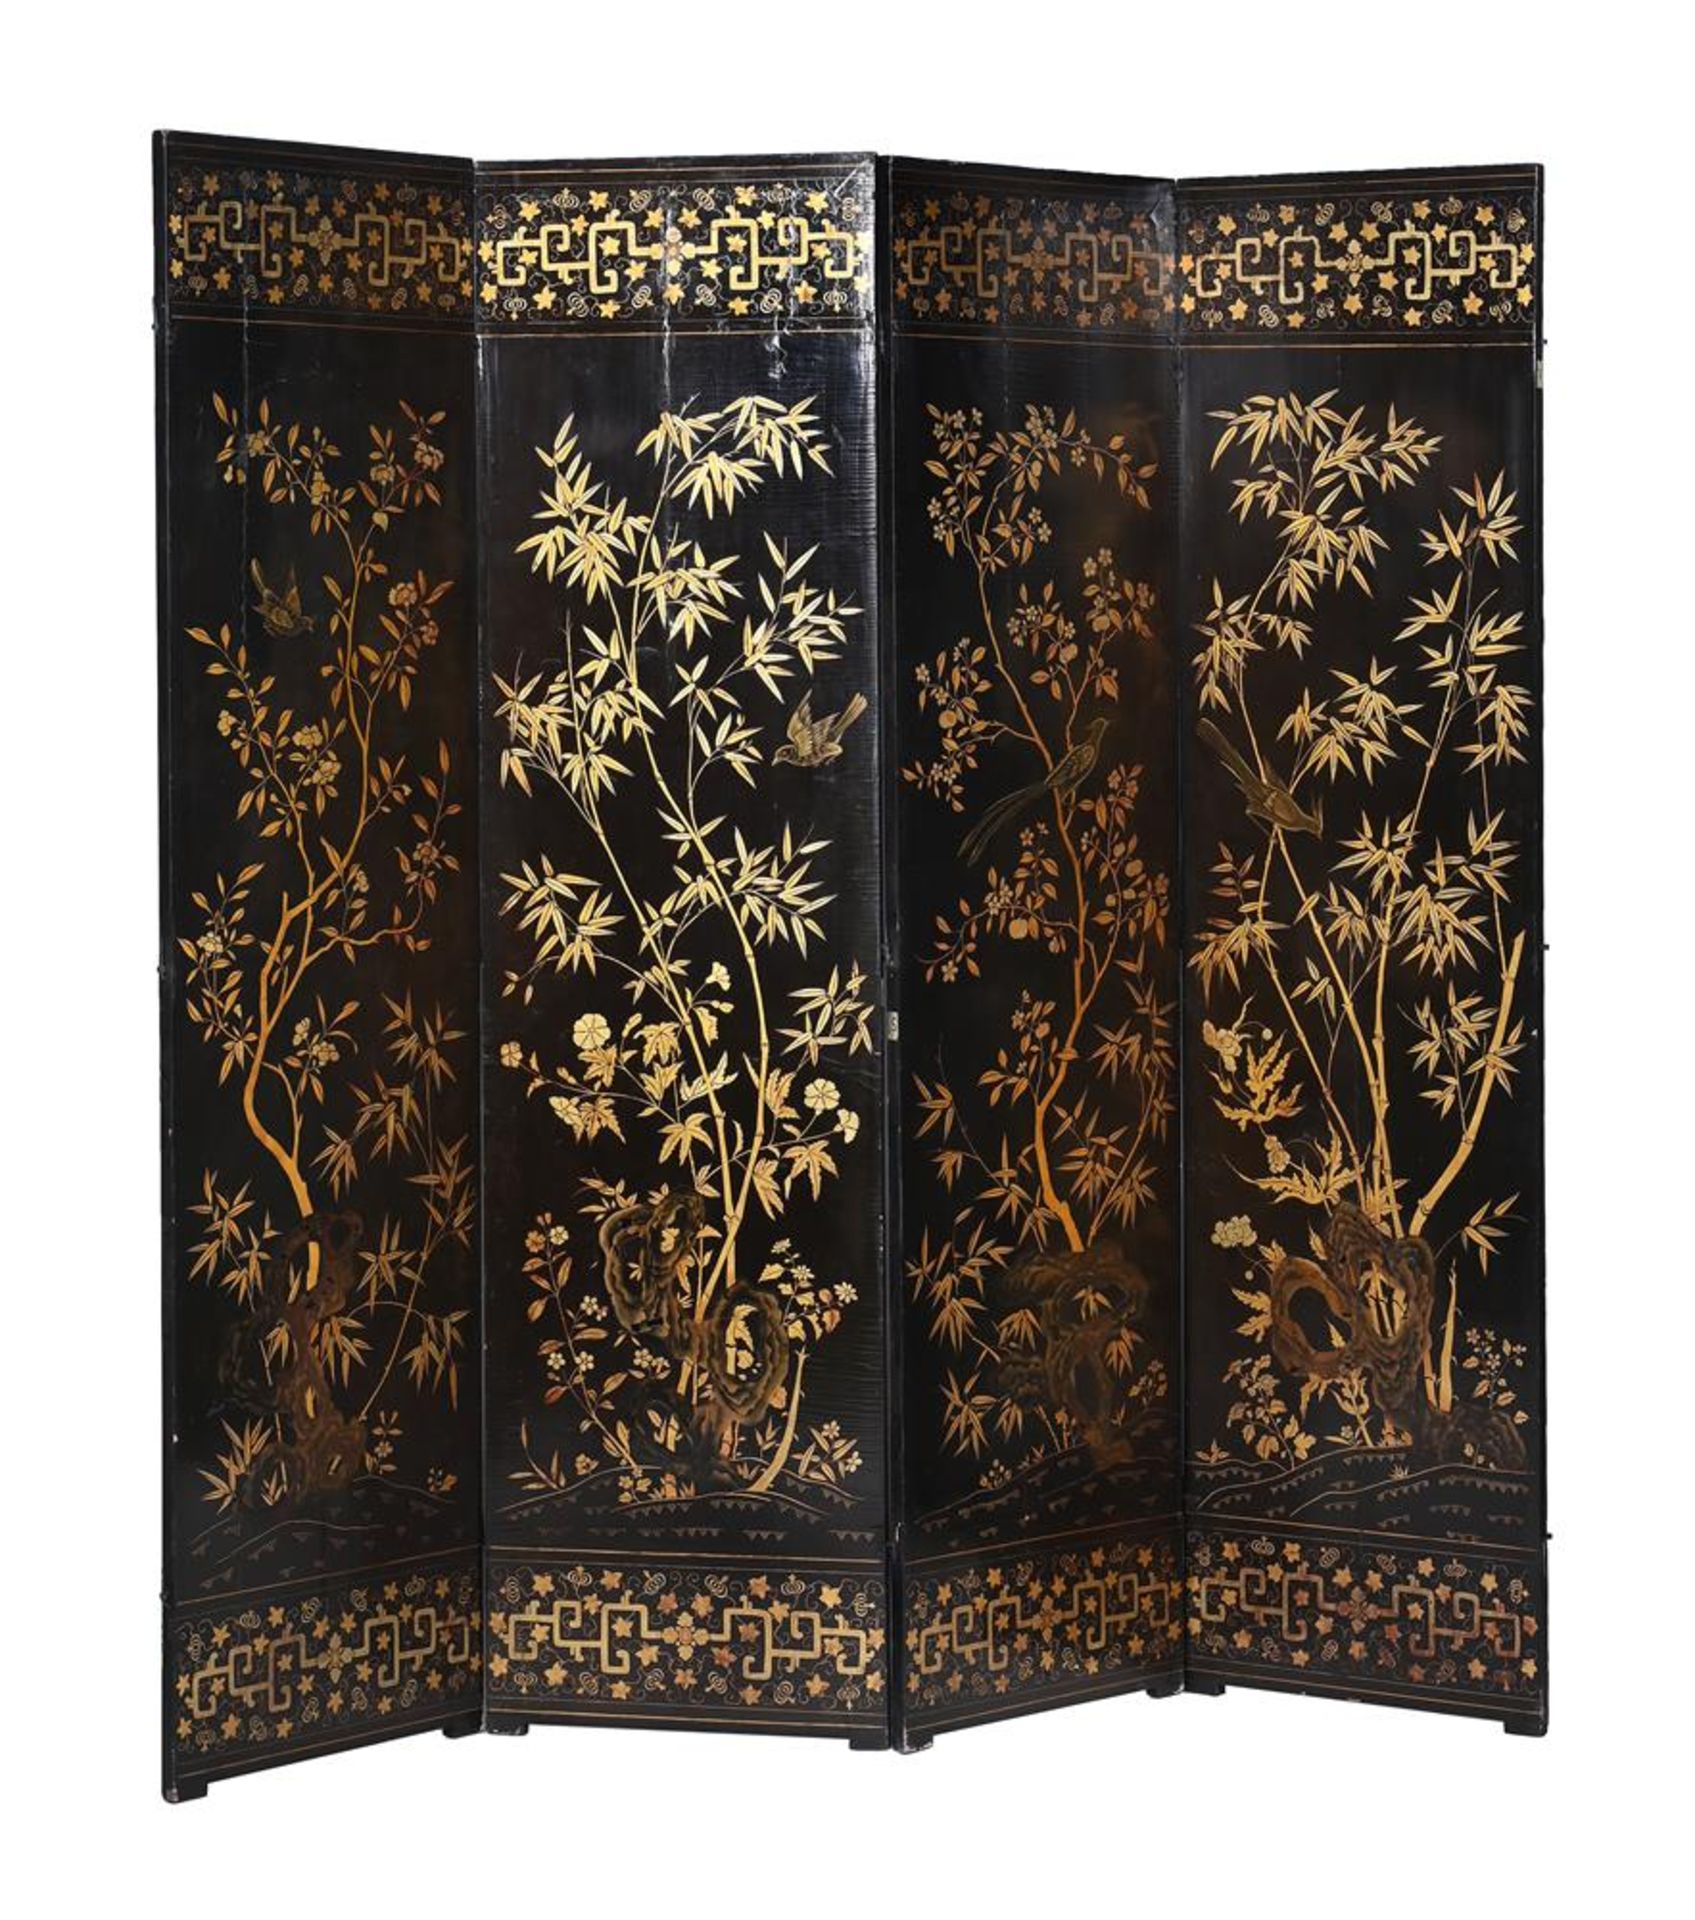 A CHINESE BLACK LACQUER AND GILT DECORATED FOUR-FOLD SCREEN